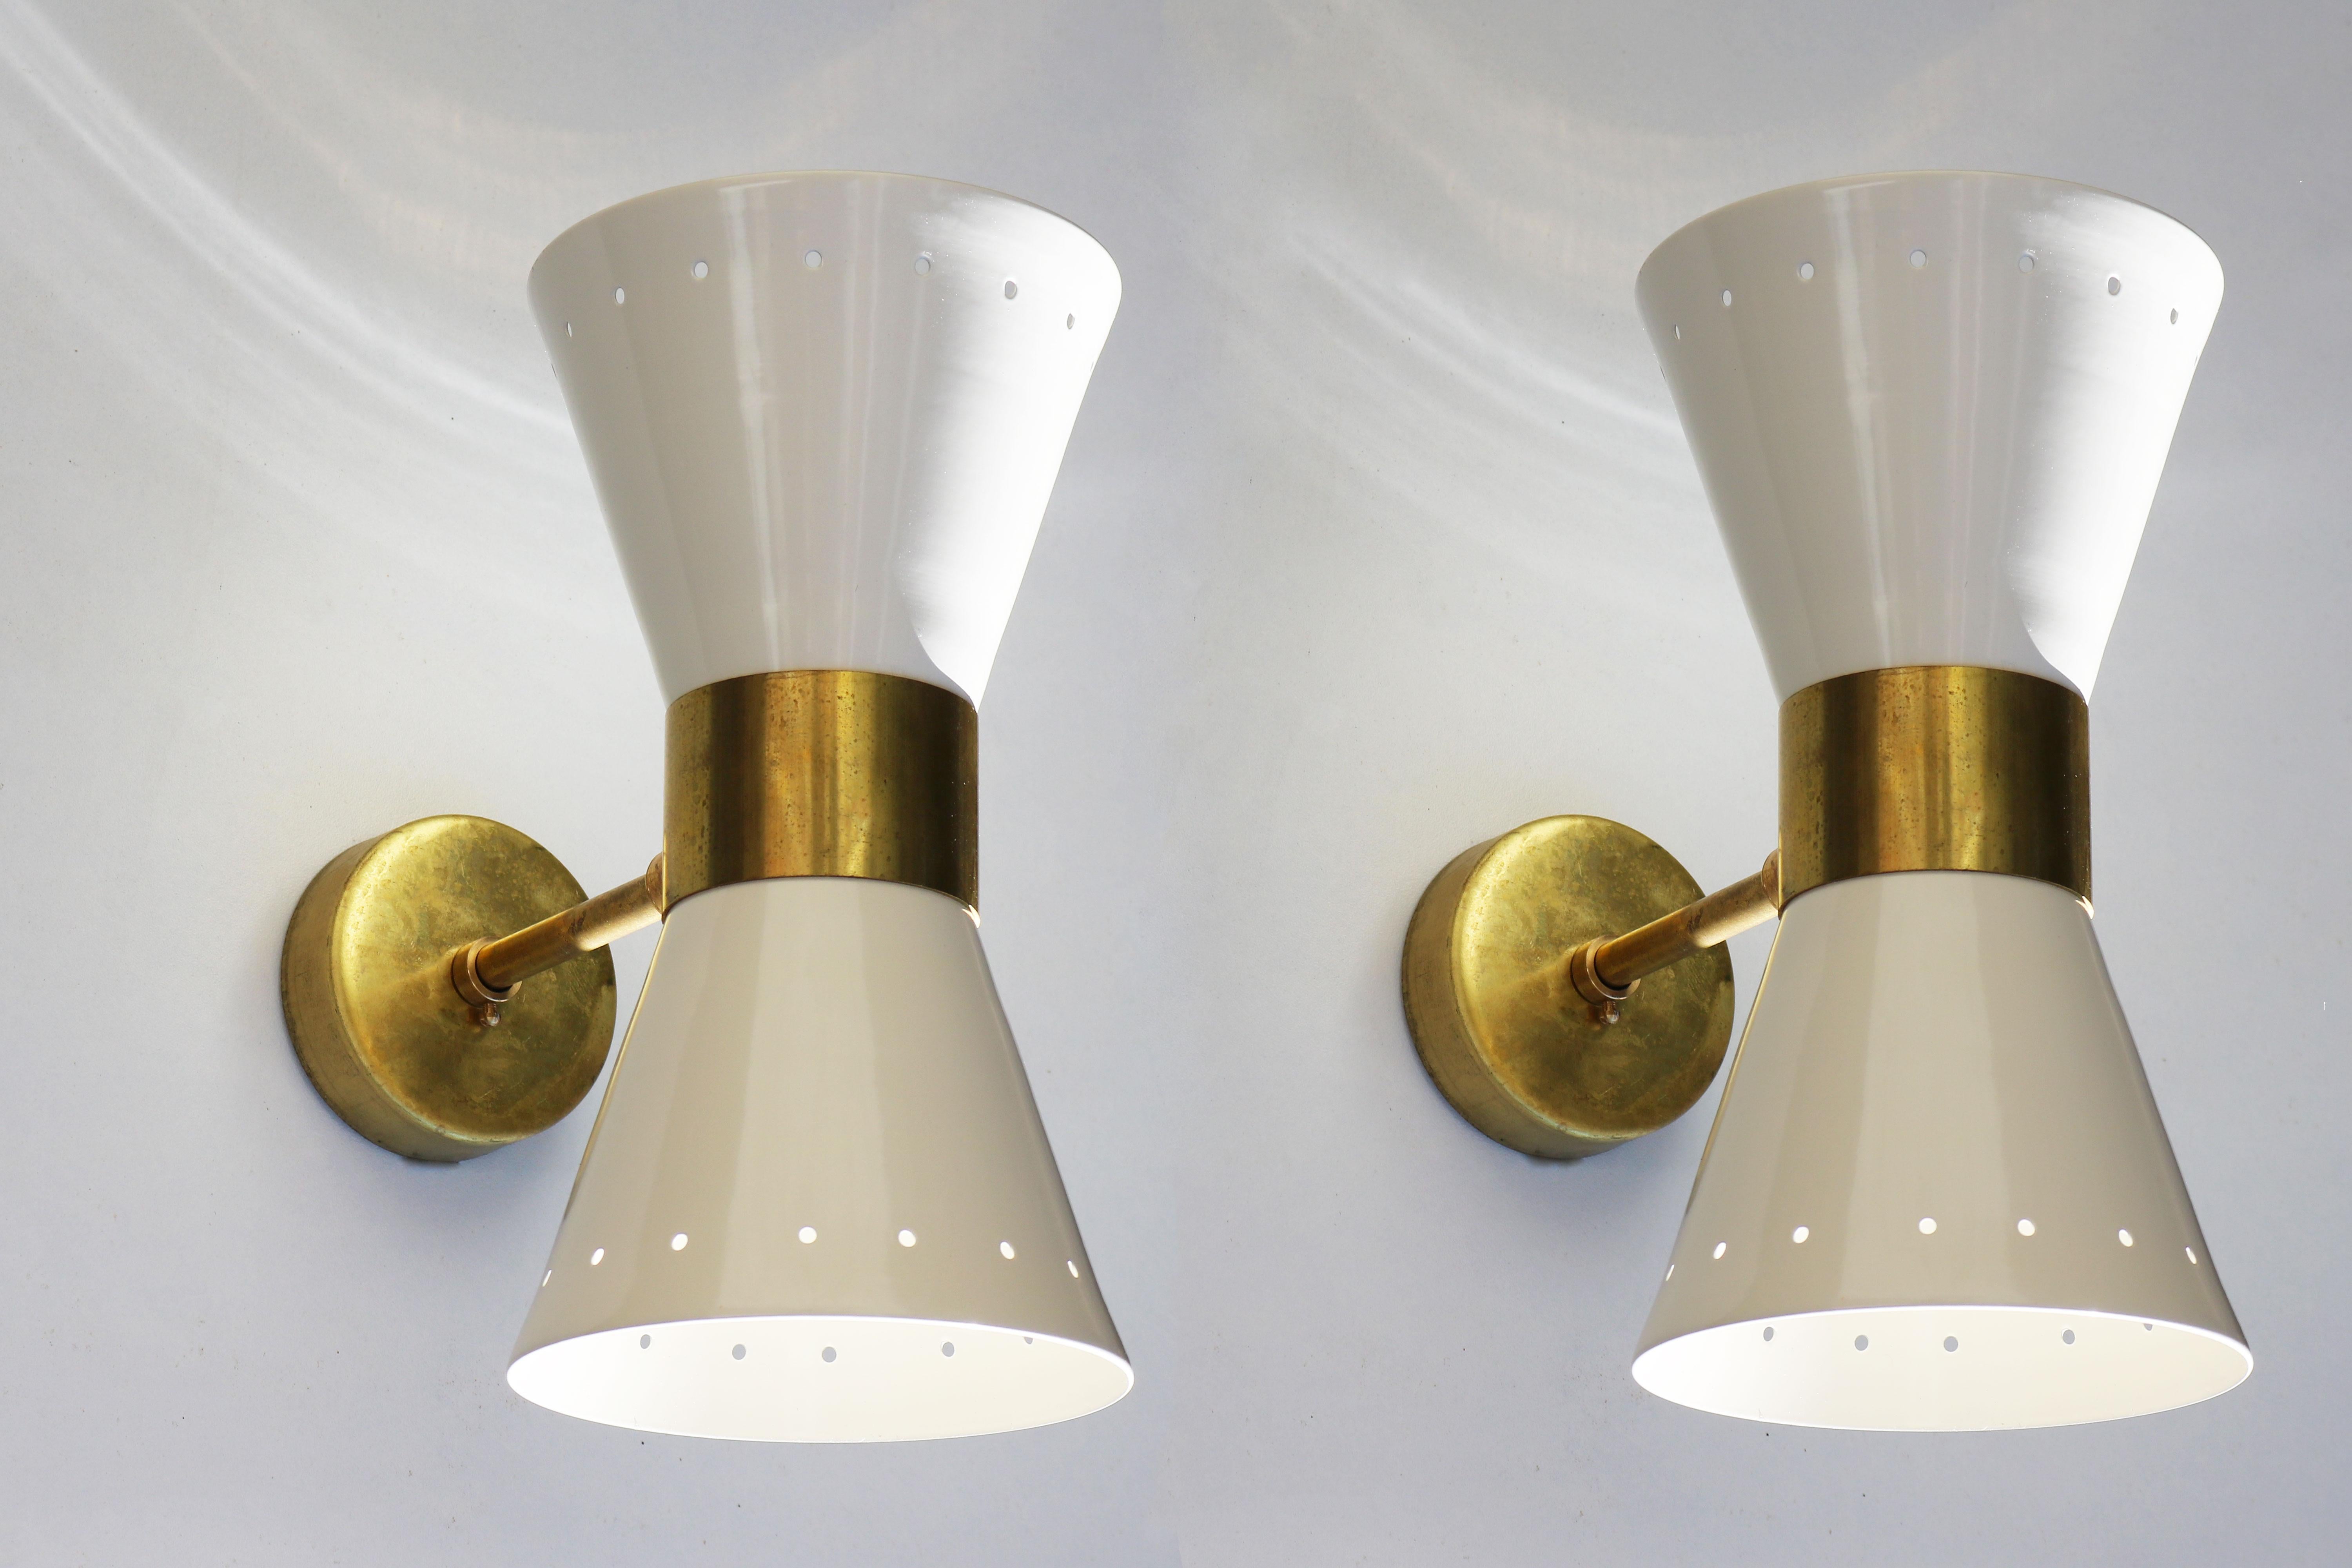 Rare set of gorgeous Italian design Diabolo wall lights of the 1950s in the style of Stilnovo
The patinated brass combines really well with the white metal shades.
The wall lights have been rewired for daily use and look amazing.
Each wall light